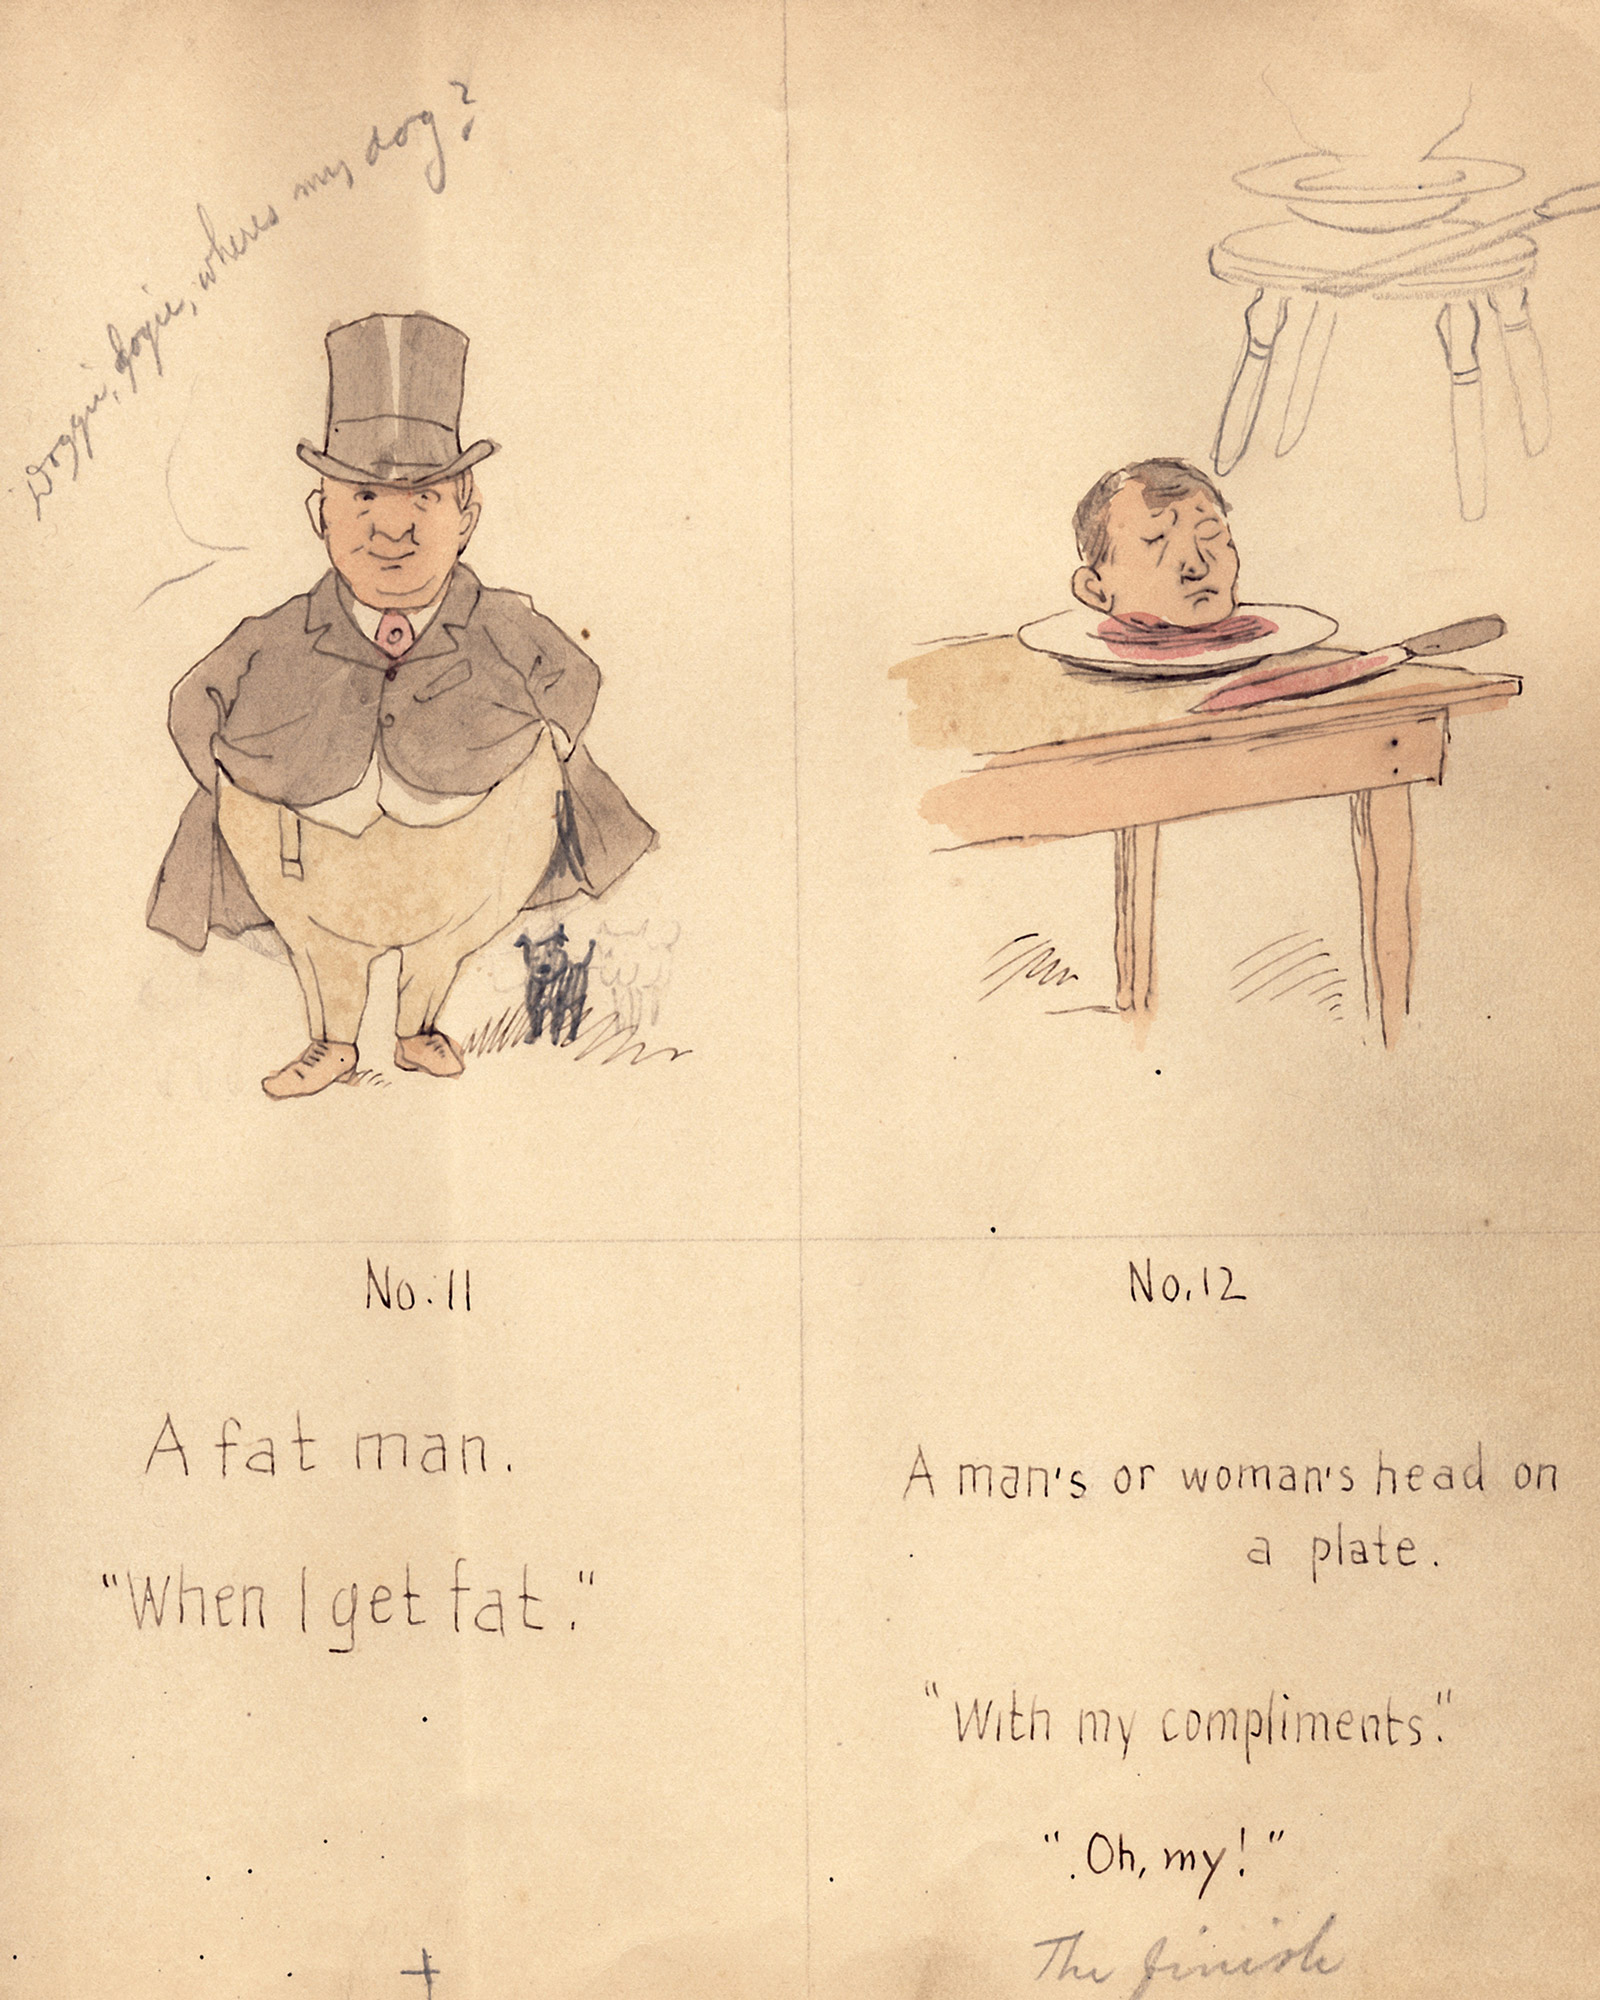 An image circa 1890 from Cassius M. Coolidge's sketchbook, featuring a fat man and a person's head on a plate. 